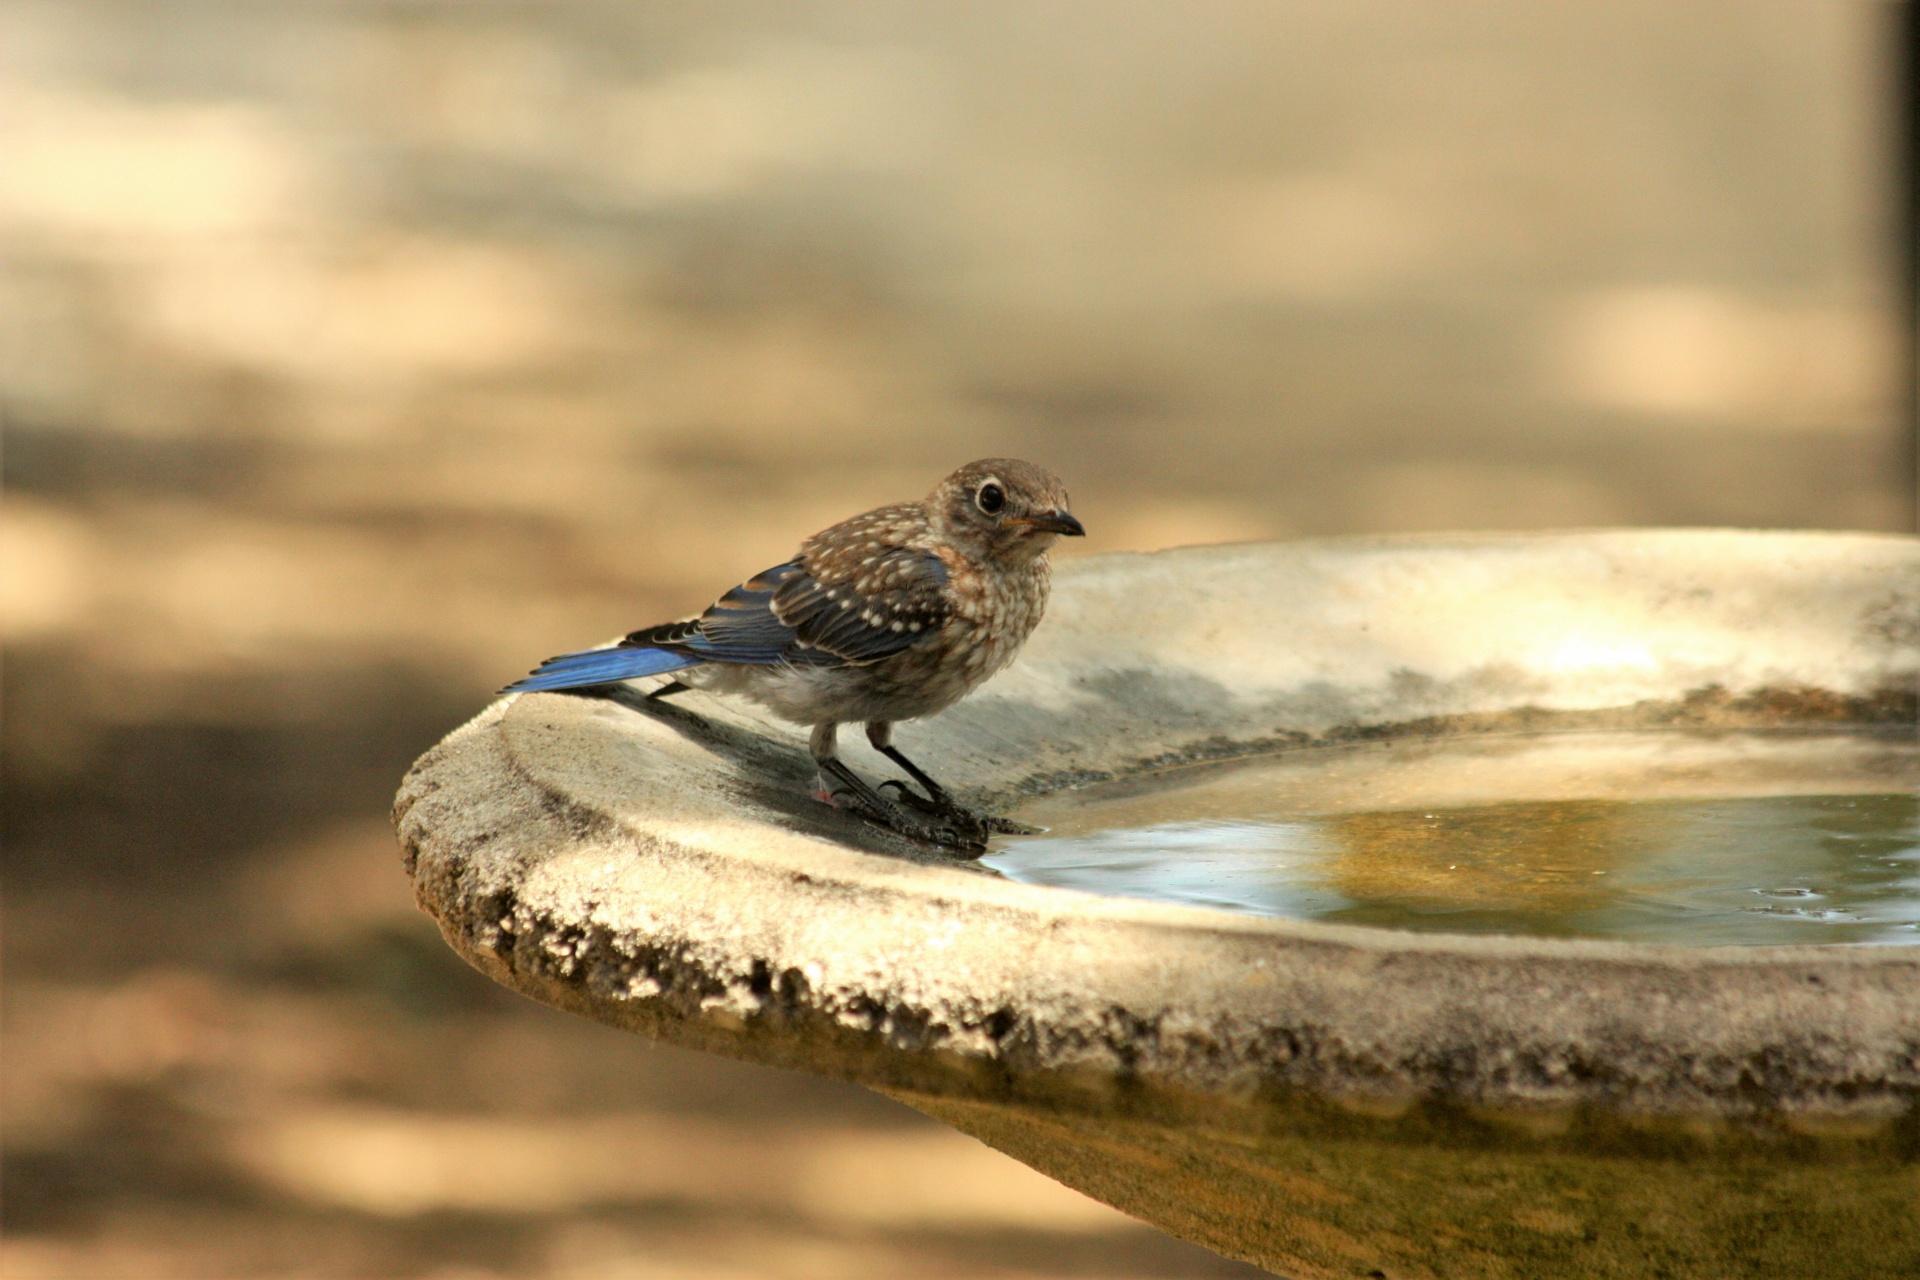 A juvenile blue jay sits at the edge of the water in a bird bath on a hot summer day.